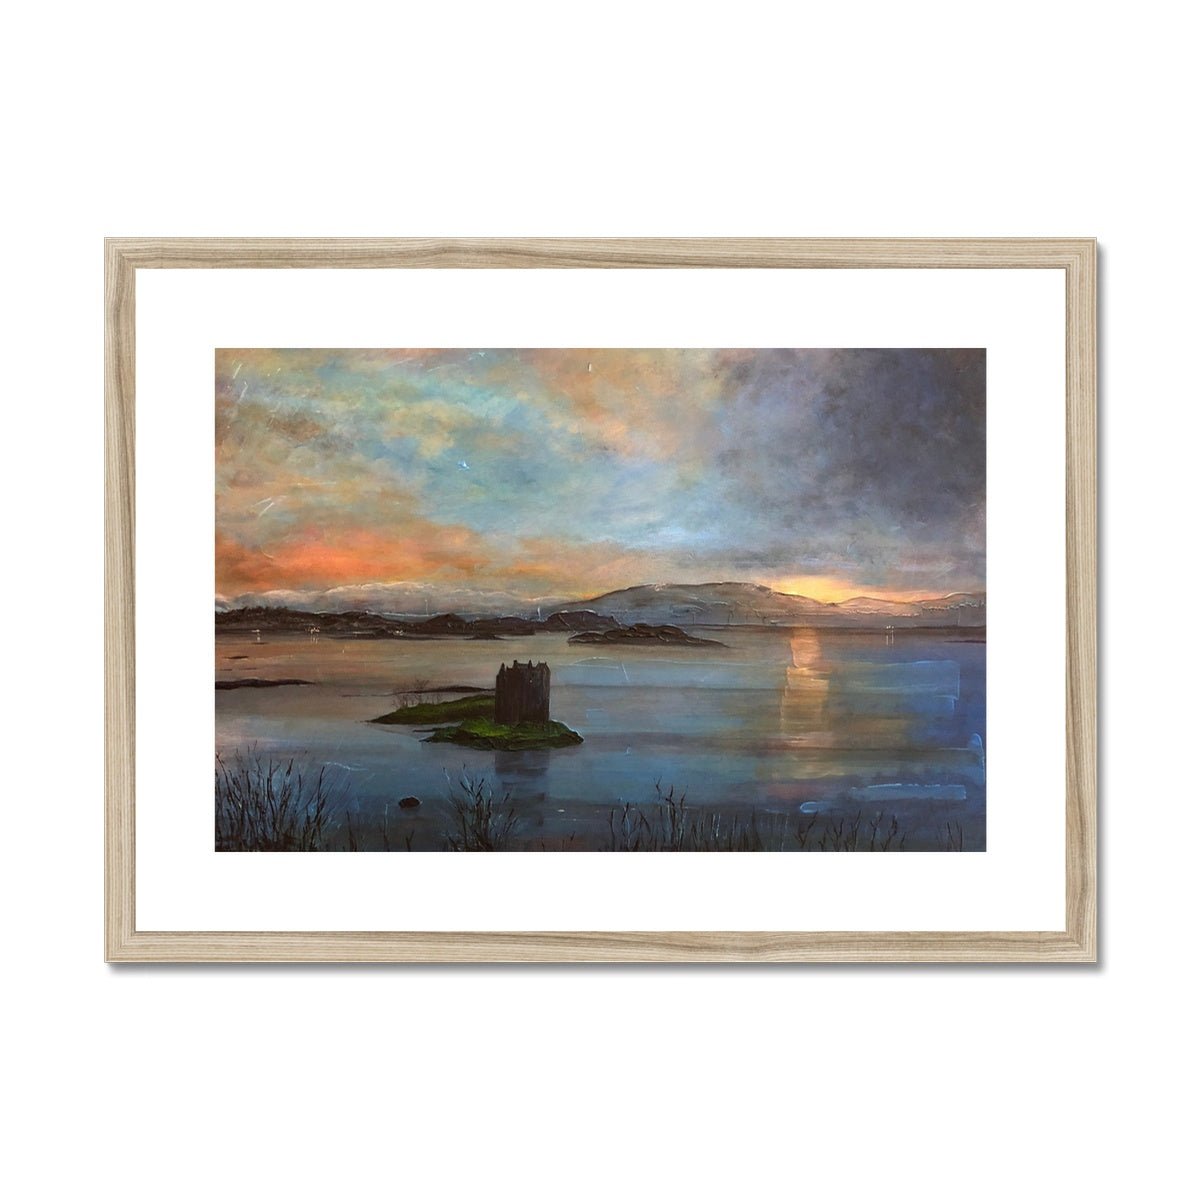 Castle Stalker Twilight Painting | Framed & Mounted Prints From Scotland-Framed & Mounted Prints-Historic & Iconic Scotland Art Gallery-A2 Landscape-Natural Frame-Paintings, Prints, Homeware, Art Gifts From Scotland By Scottish Artist Kevin Hunter